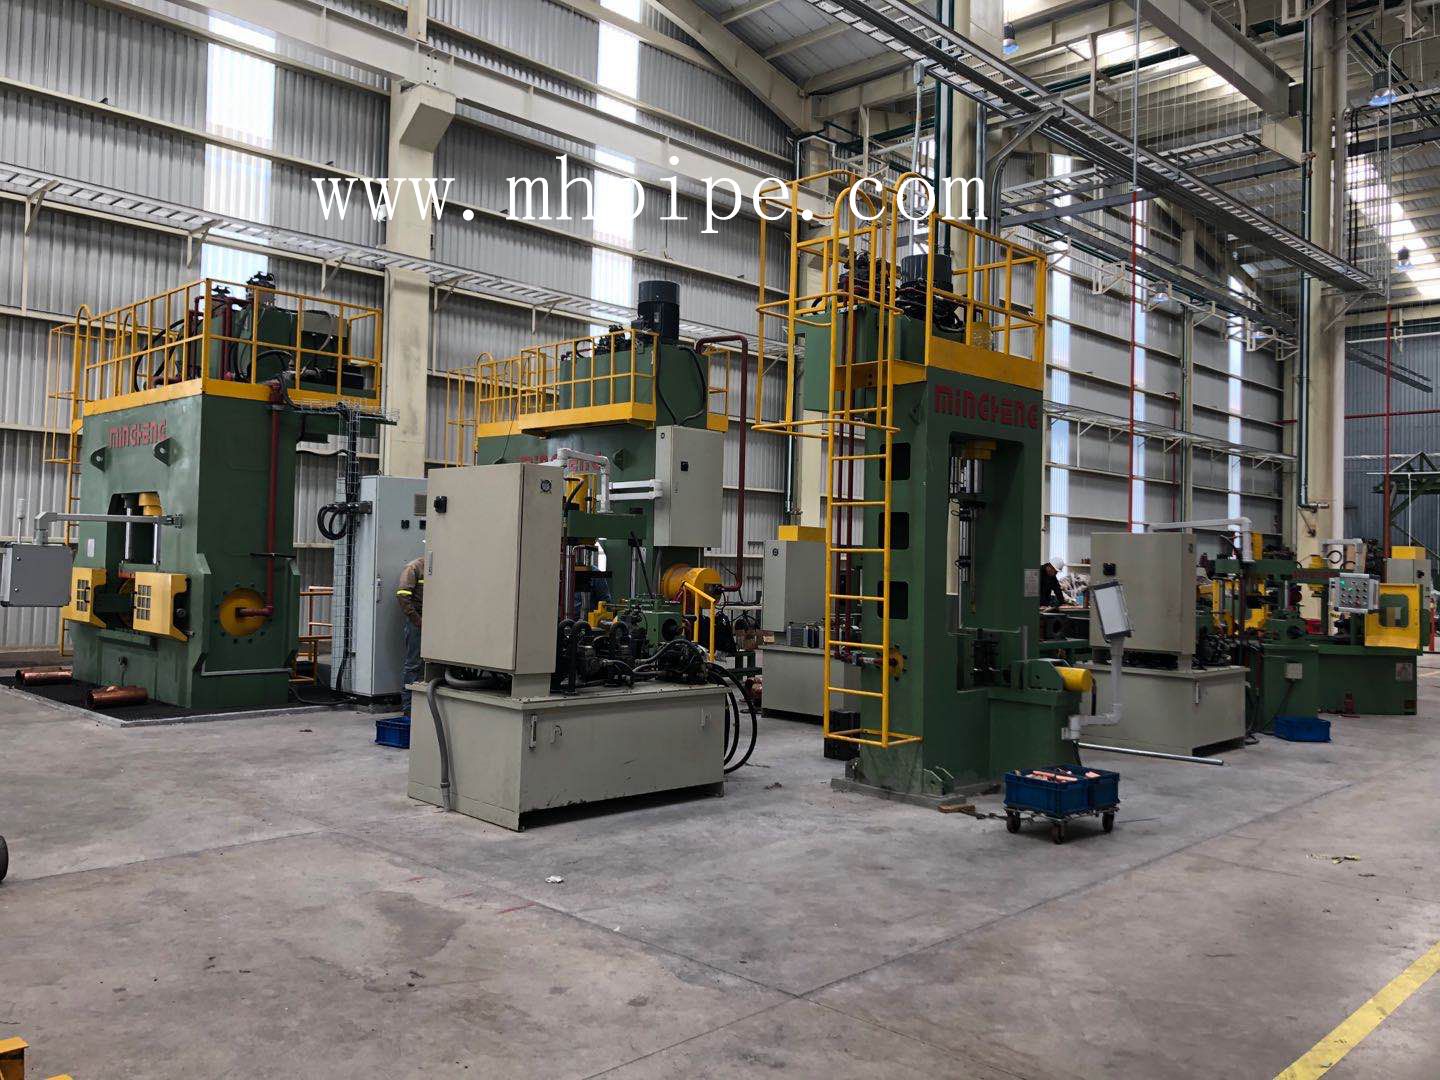 copper elbow machine, copper tee machine and beveling machine finished installation and commissioning in our Mexico customer 